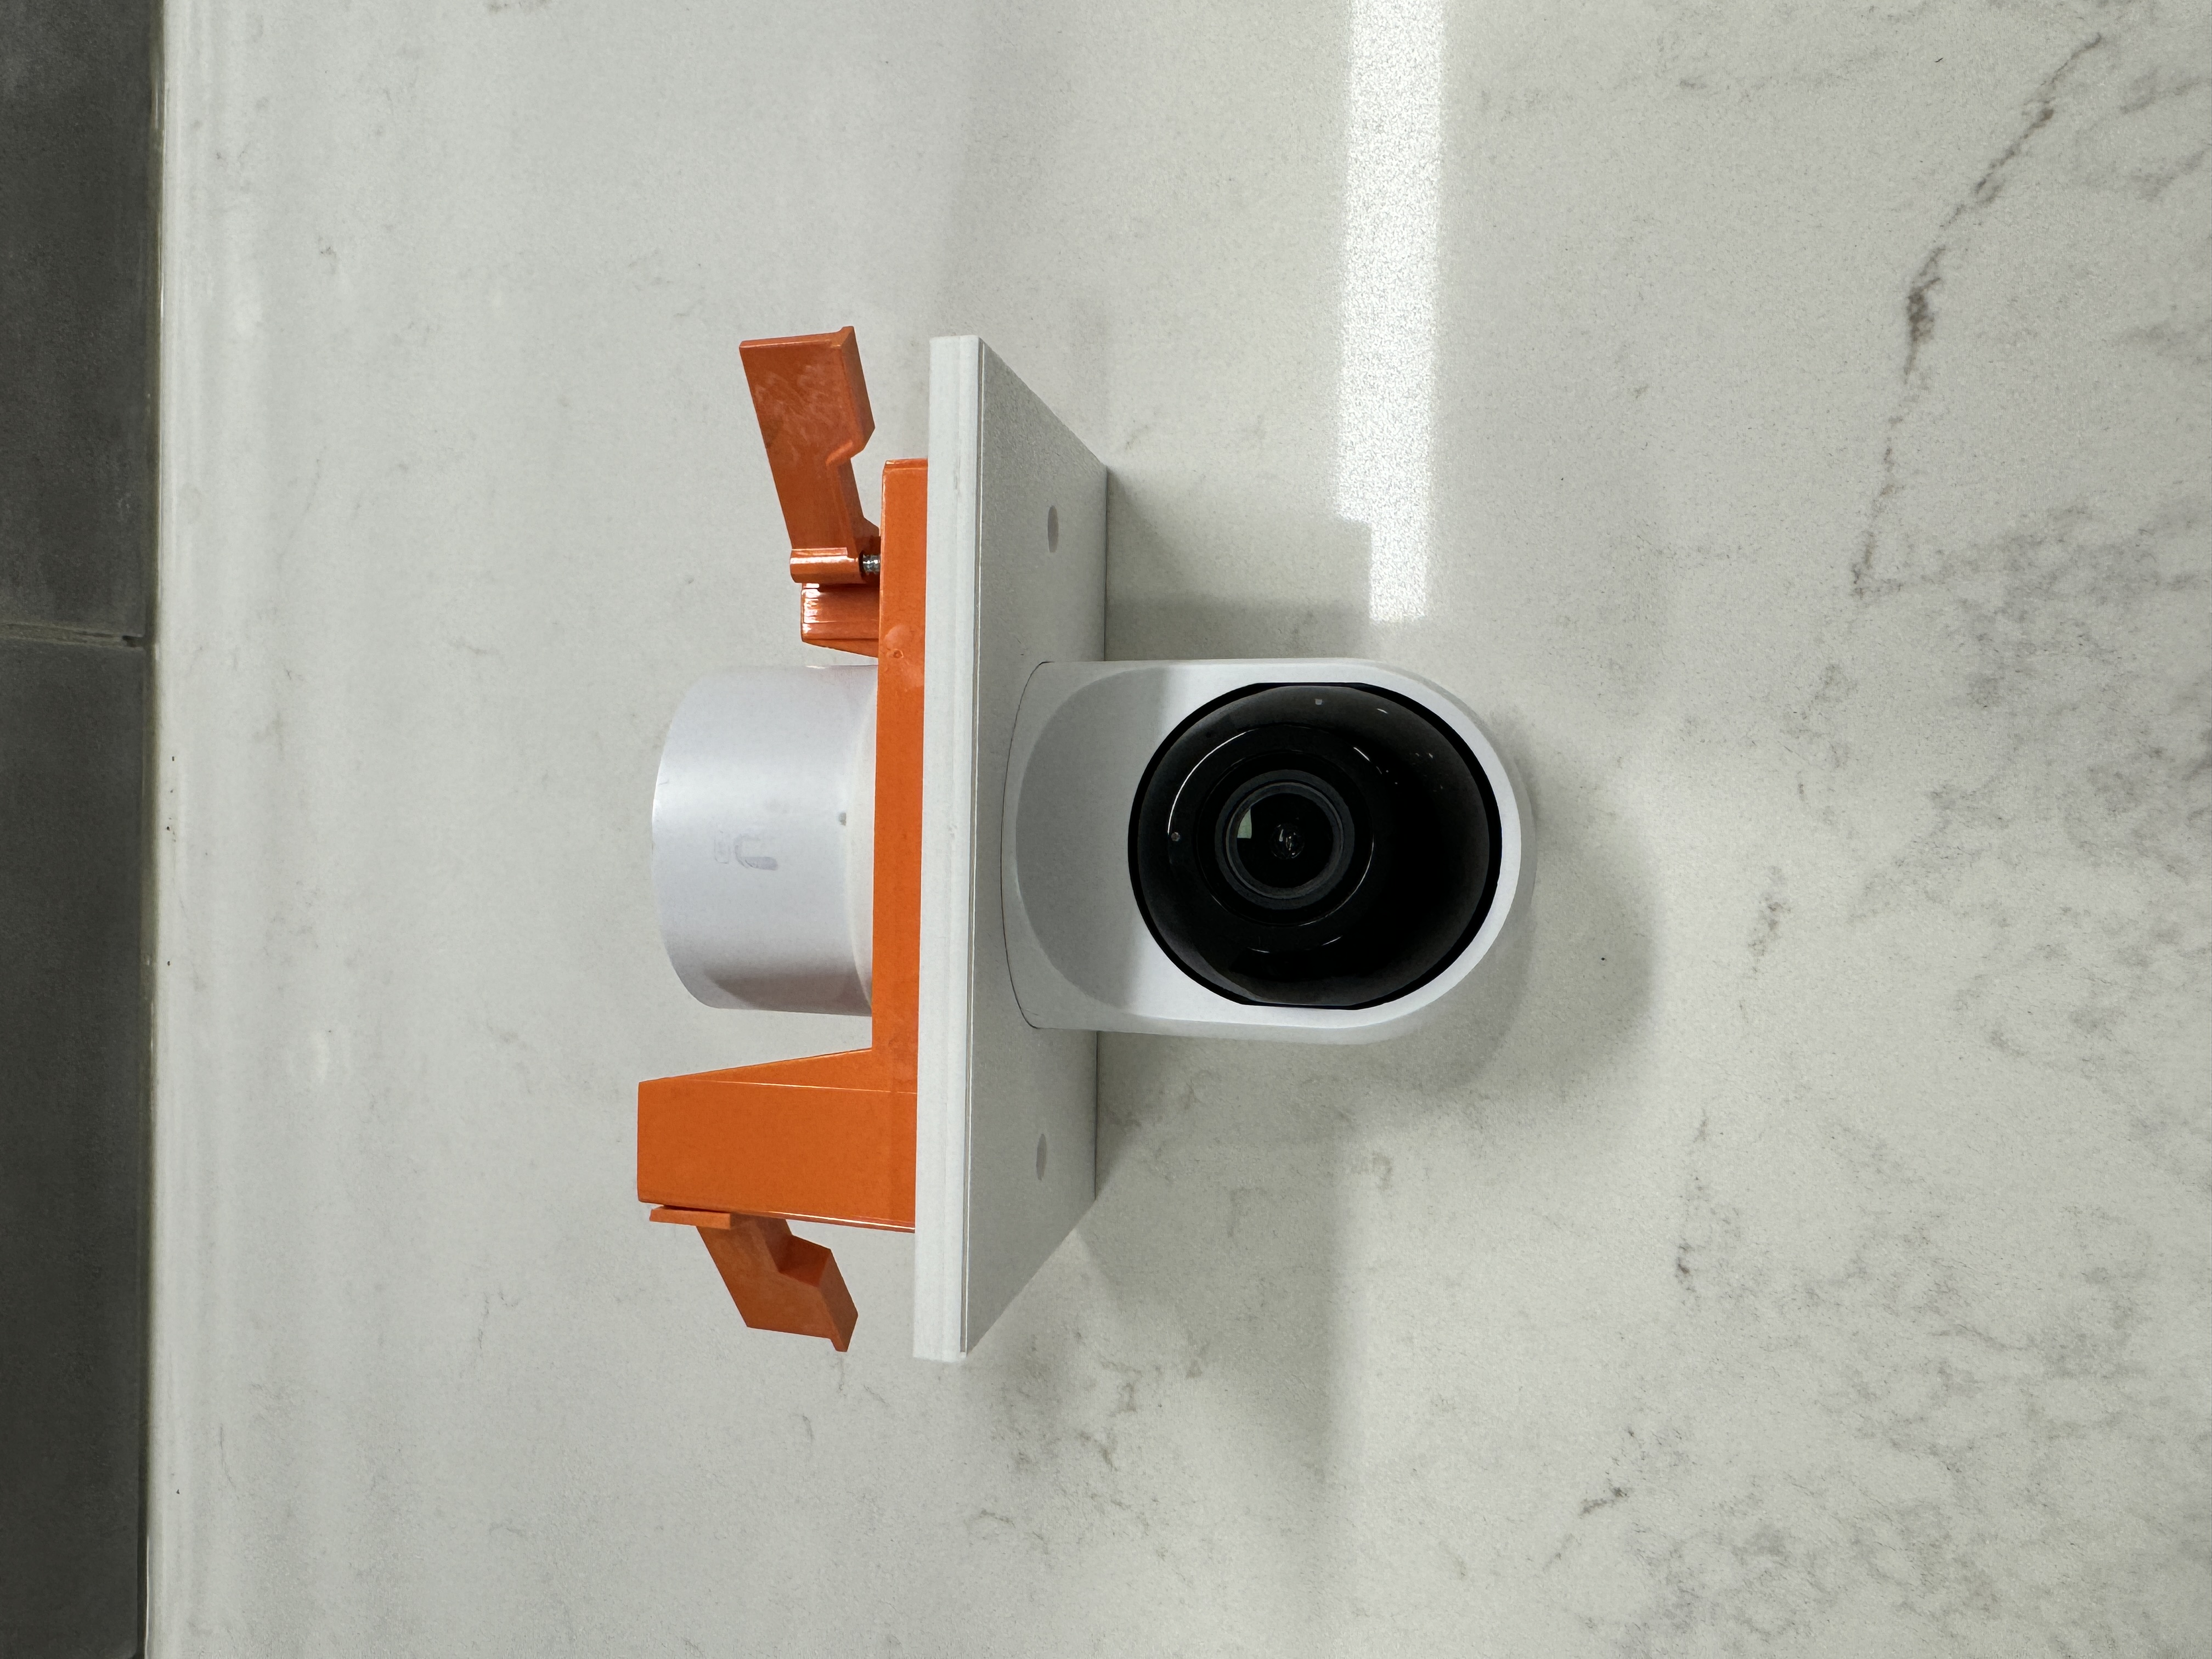 Camera Bracket can be mounted in a 1-gang low voltage bracket